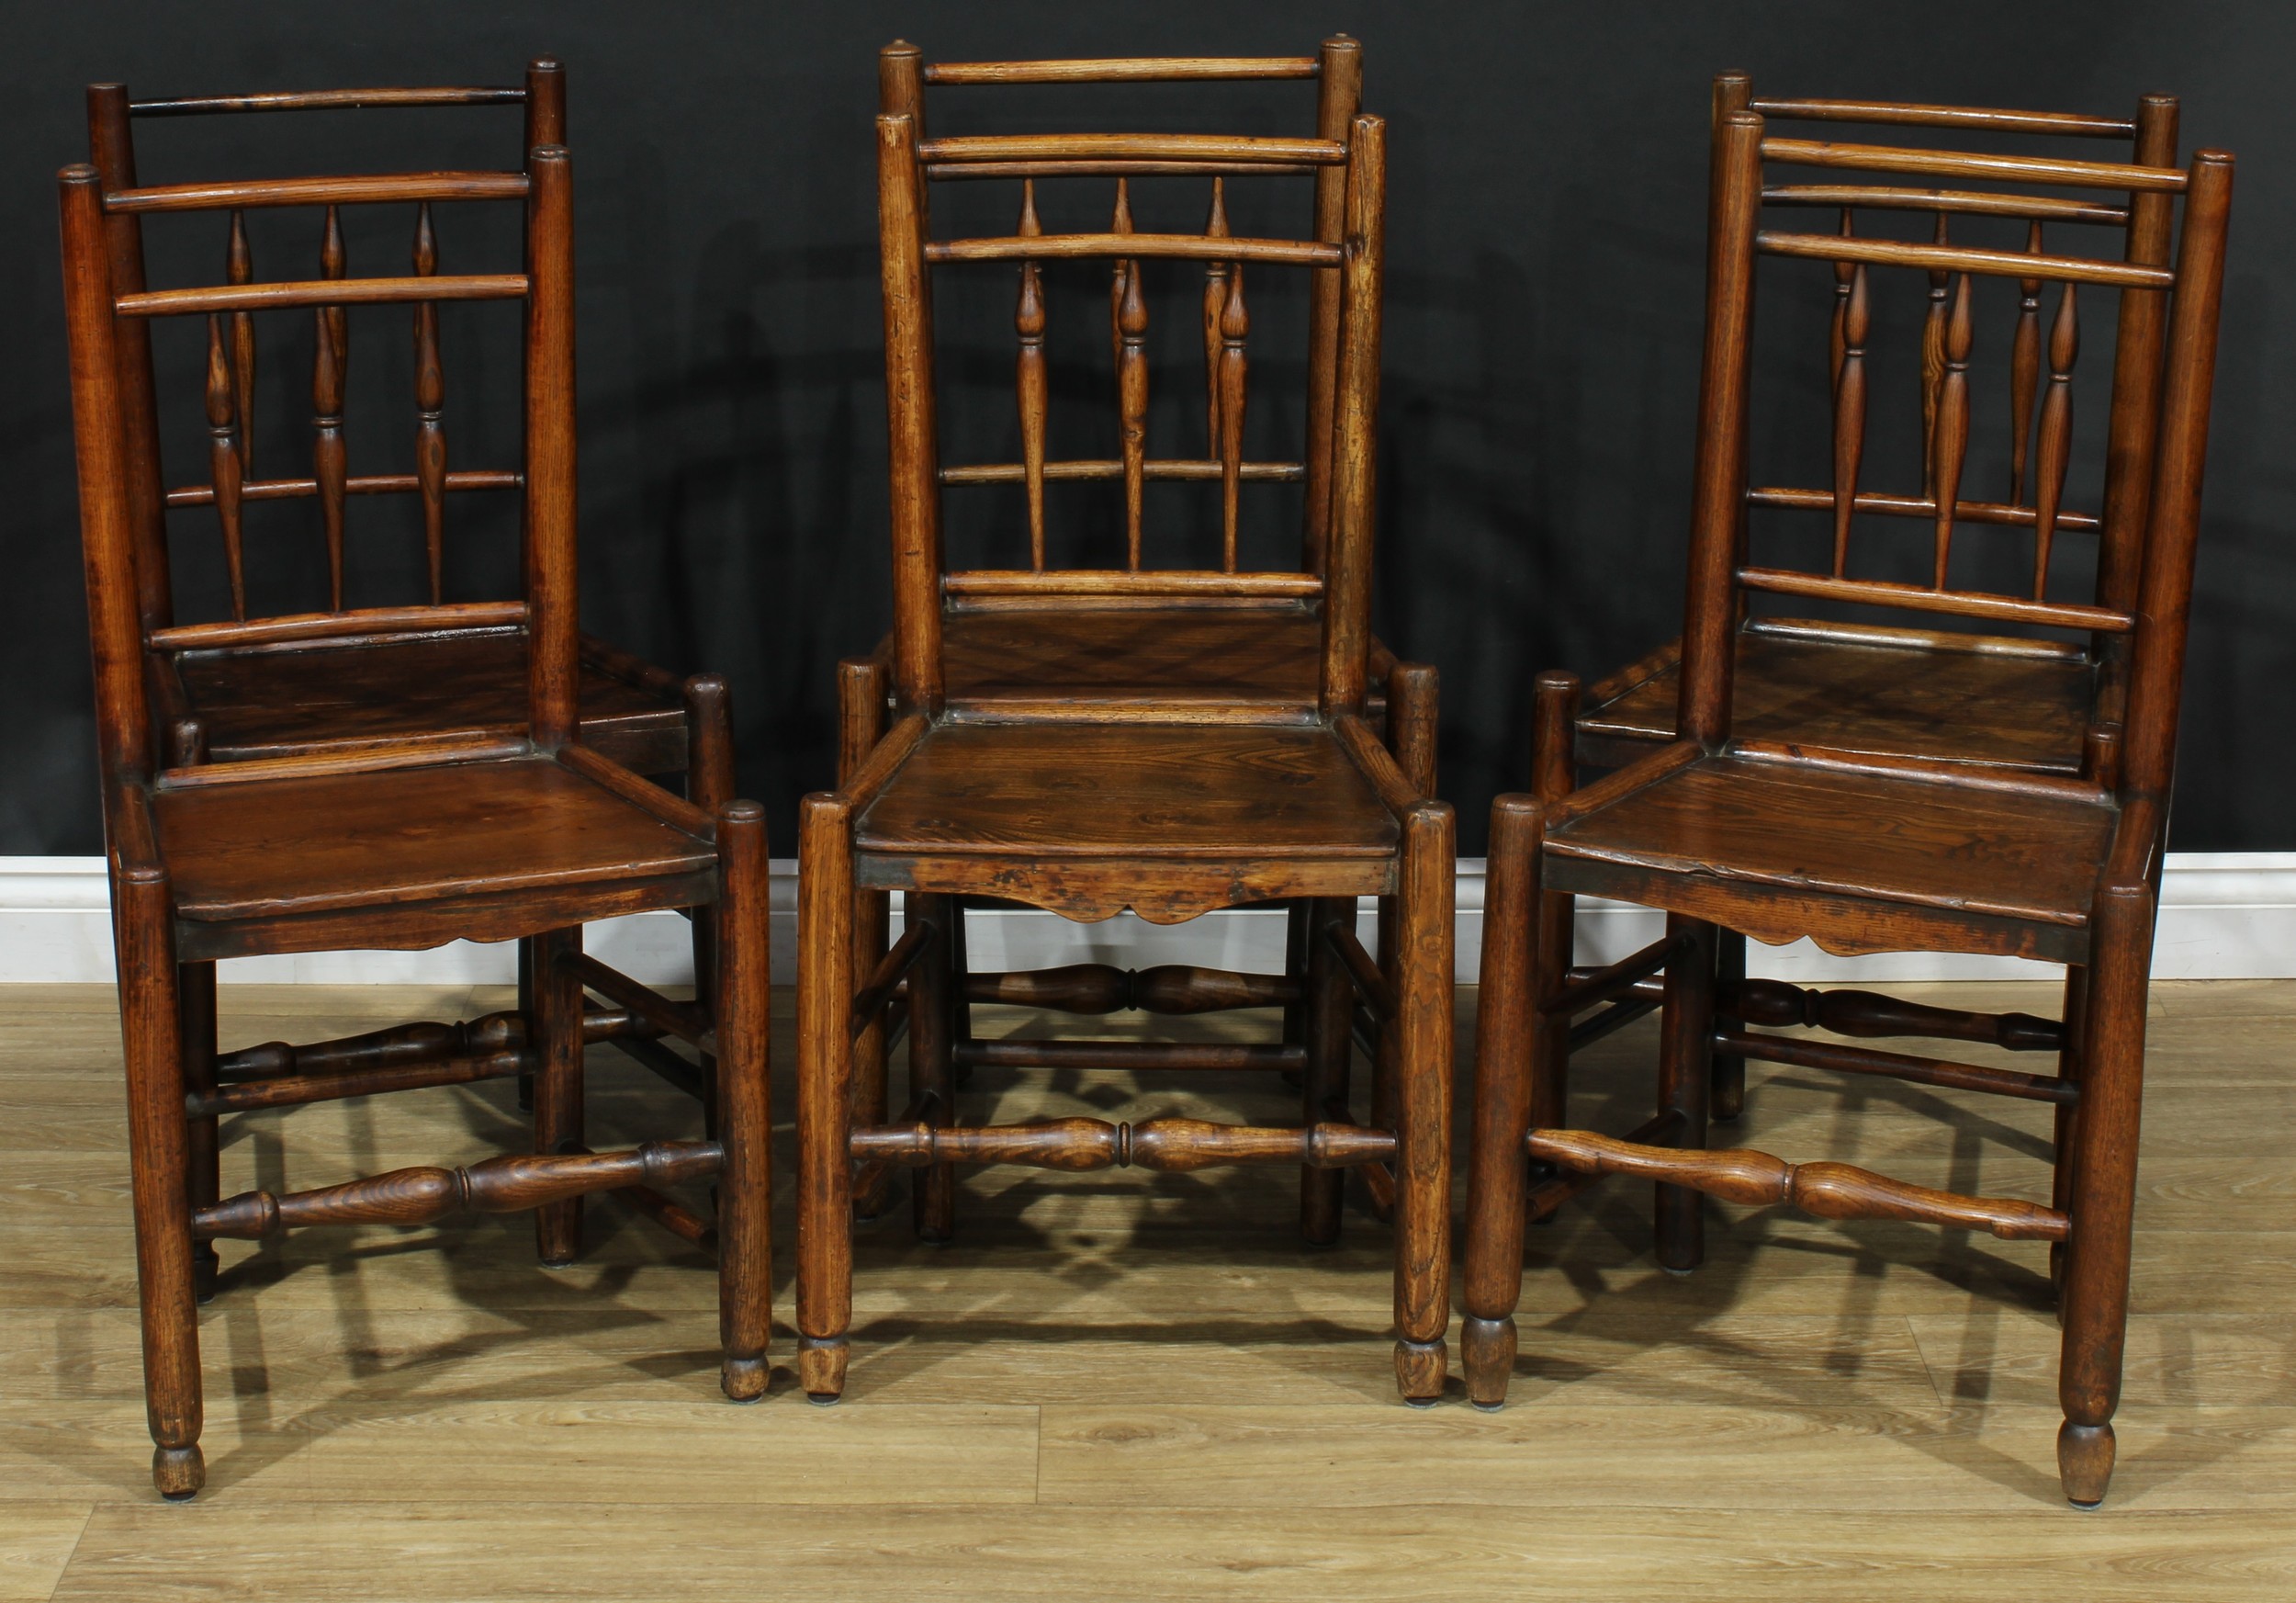 Six 19th century Philip Clissett design ash and elm country chairs, probably West Midlands, one 87.